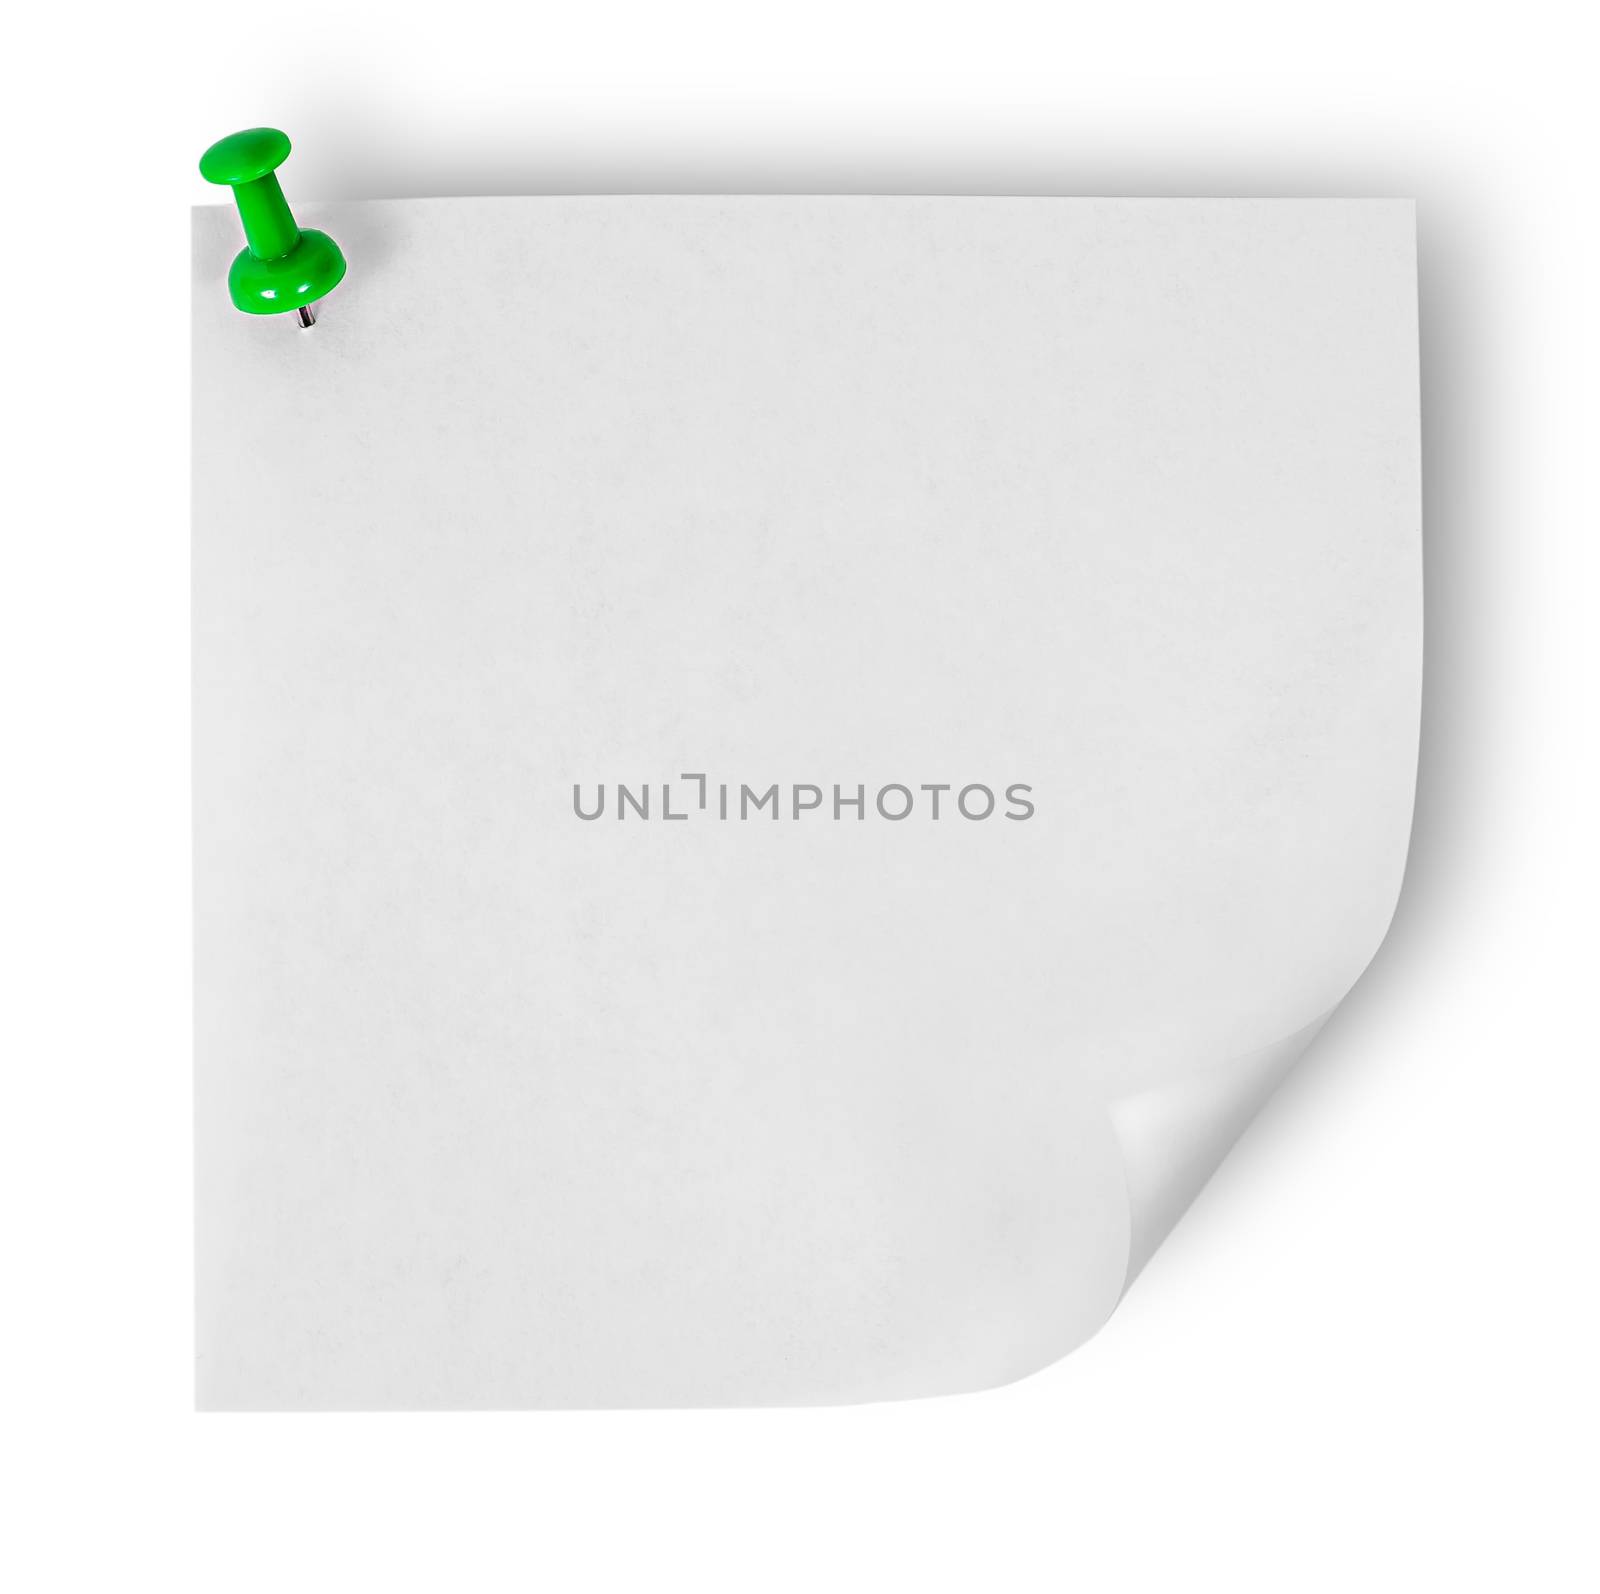 White sticker with the wrapped up corner pinned green office pin isolated on white background